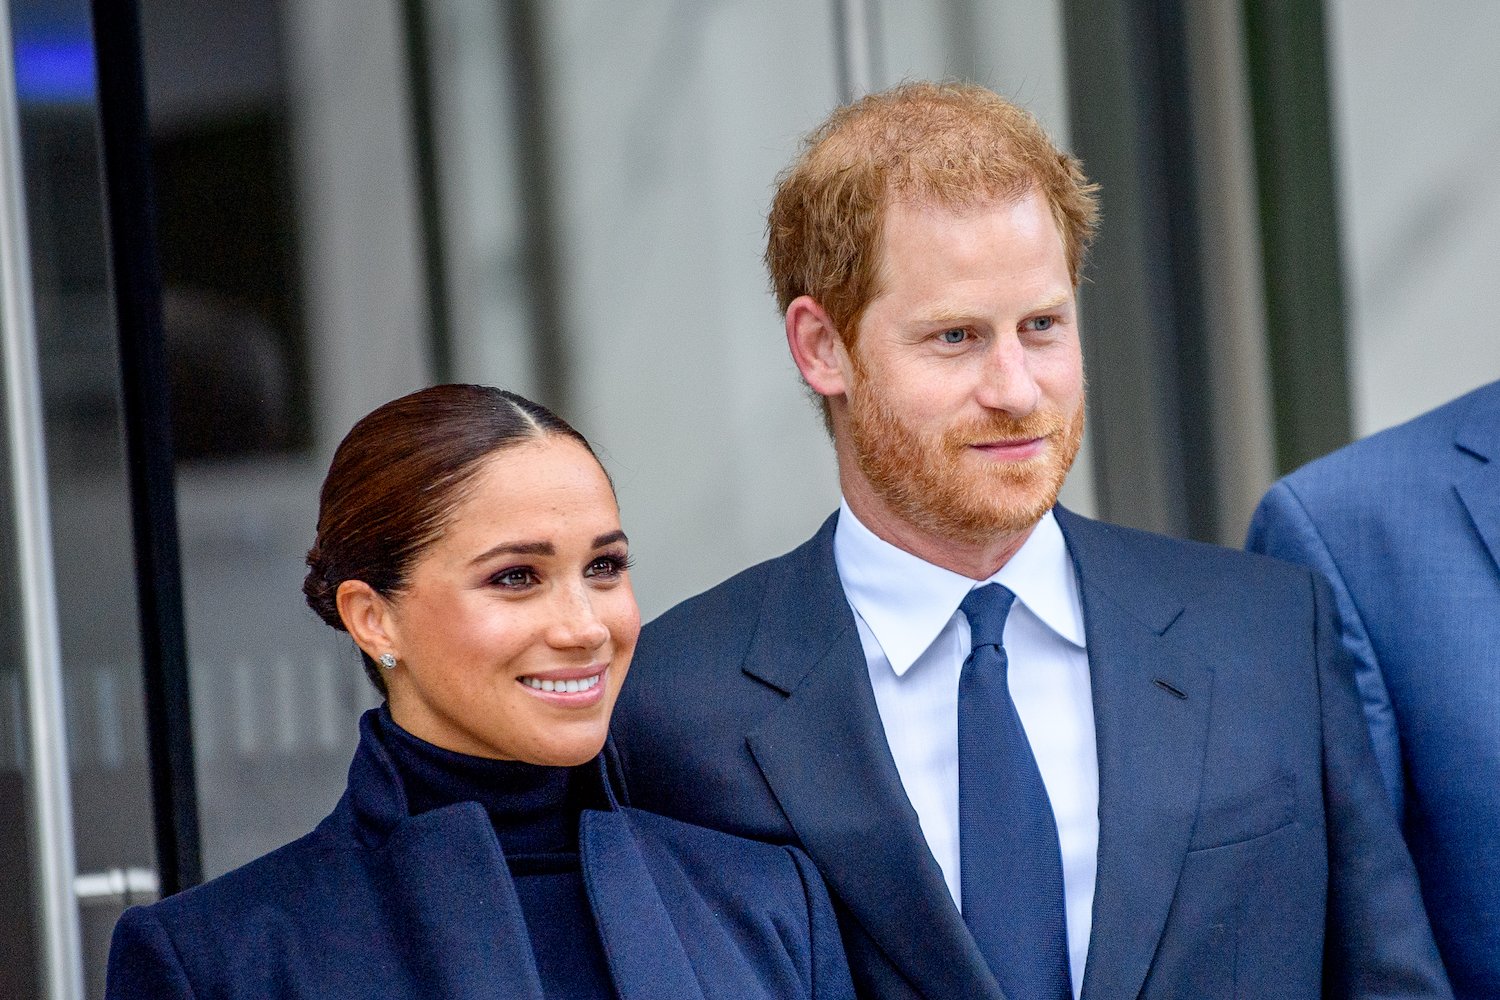 Meghan Markle Looked Vulnerable During First Outing With Prince Harry After Frogmore Cottage Eviction, Body Language Expert Says